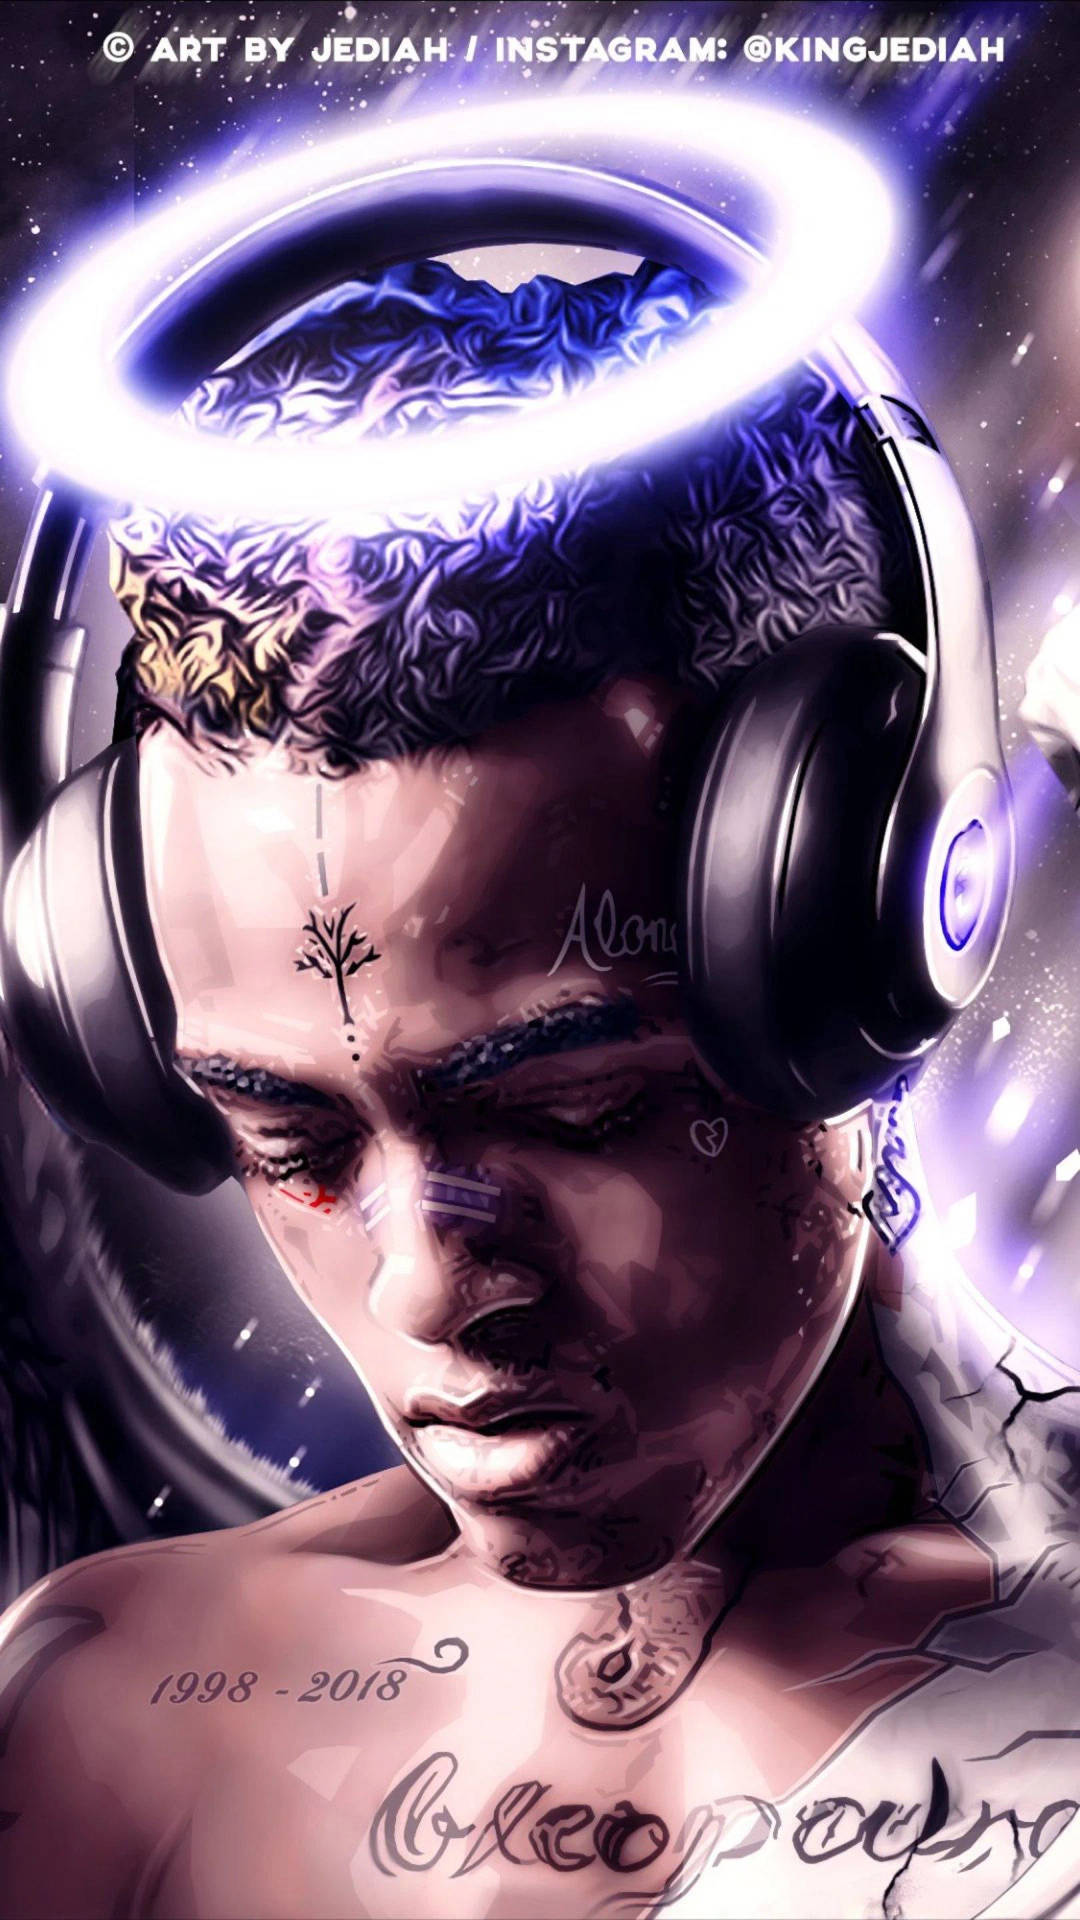 Cool Xxxtentacion With Halo And Headphones Background